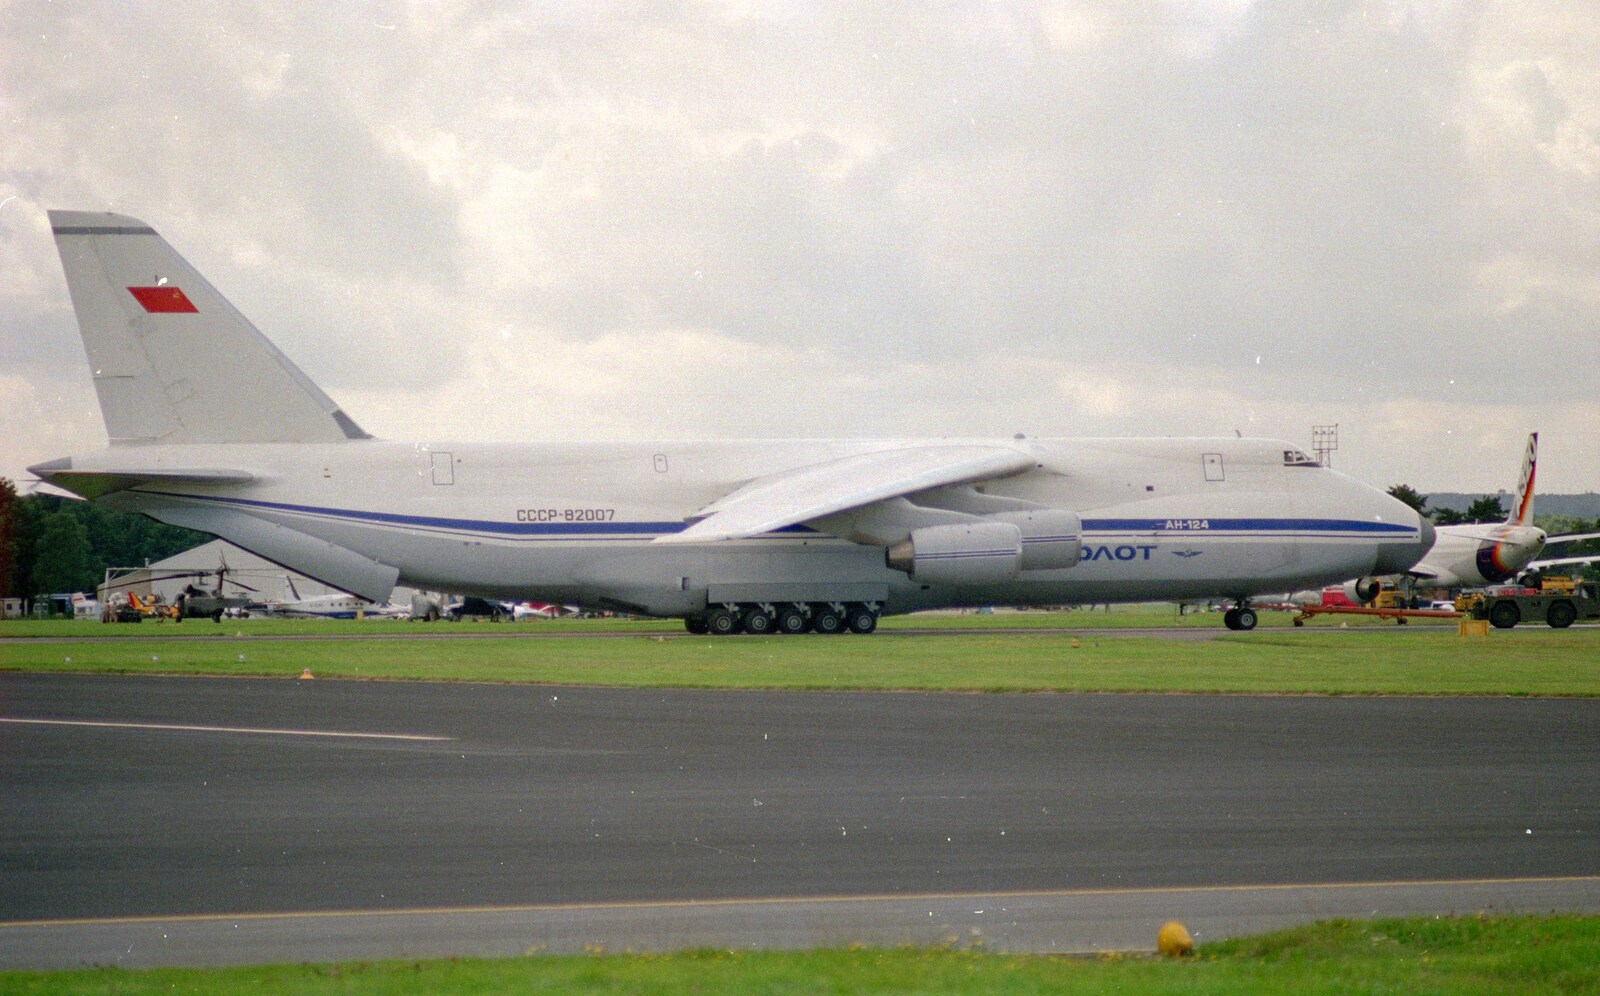 The Antonov side on - reg CCCP-82007 from Visiting Sean and Farnborough Airshow, Hampshire - 15th July 1988